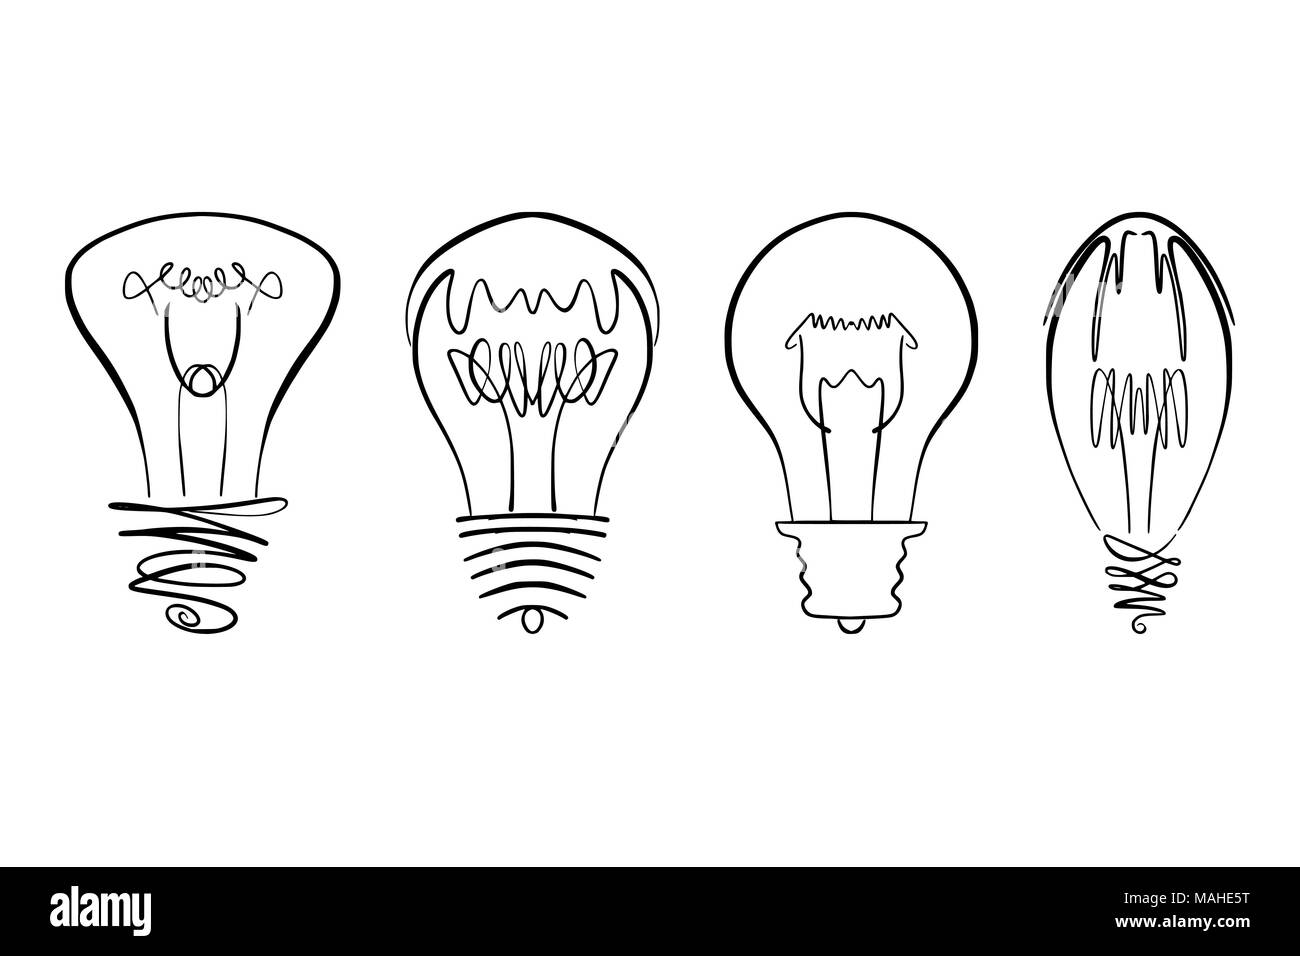 Light bulb vector image, hand drawn lightbulb set usable as logo, icon, clipart, symbol or idea design element in modern and simple design Stock Vector